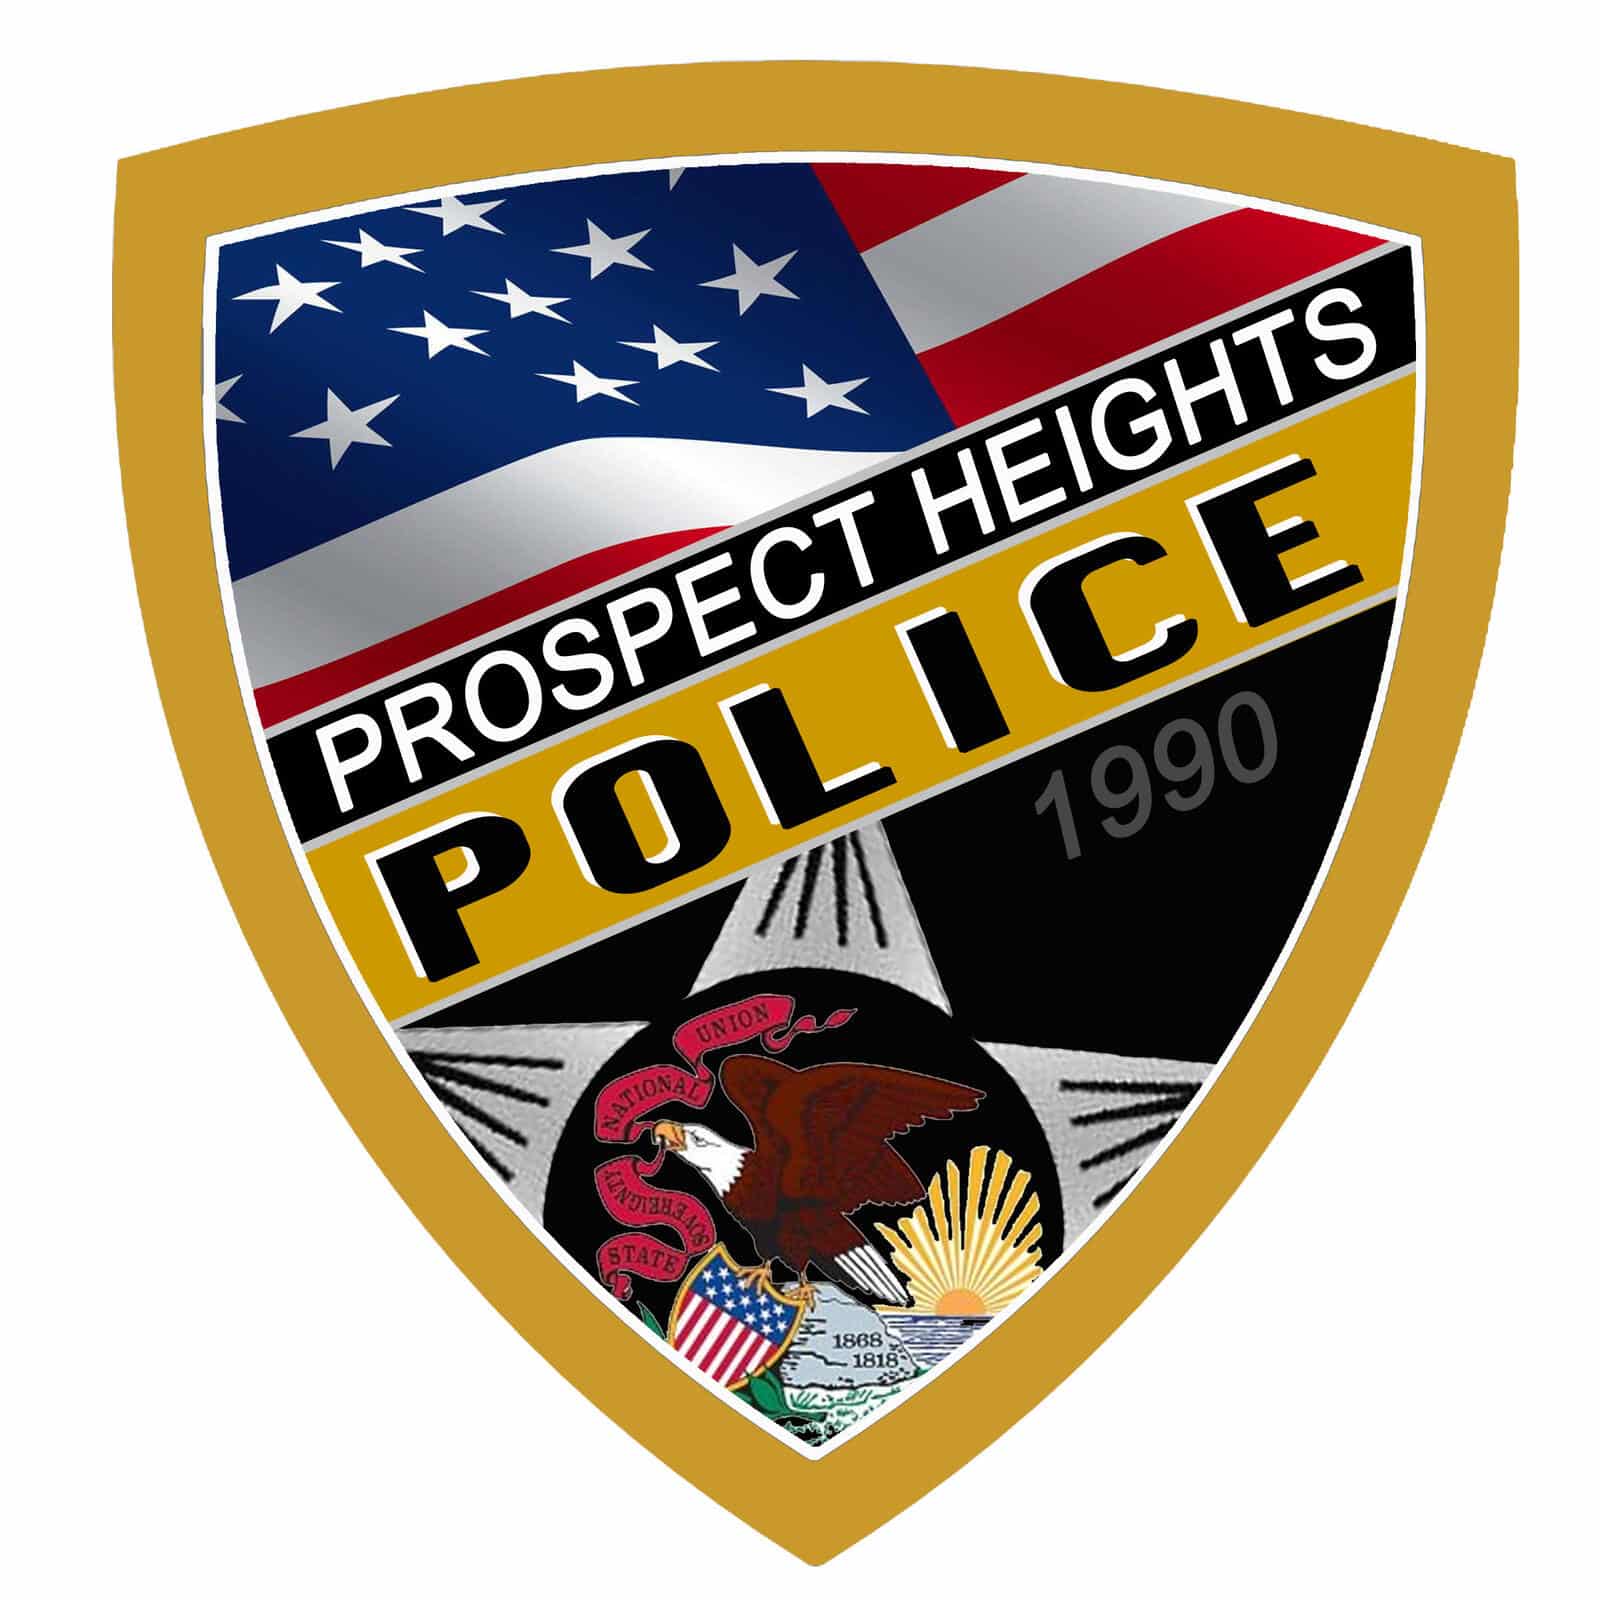 Prospect Heights Police Department